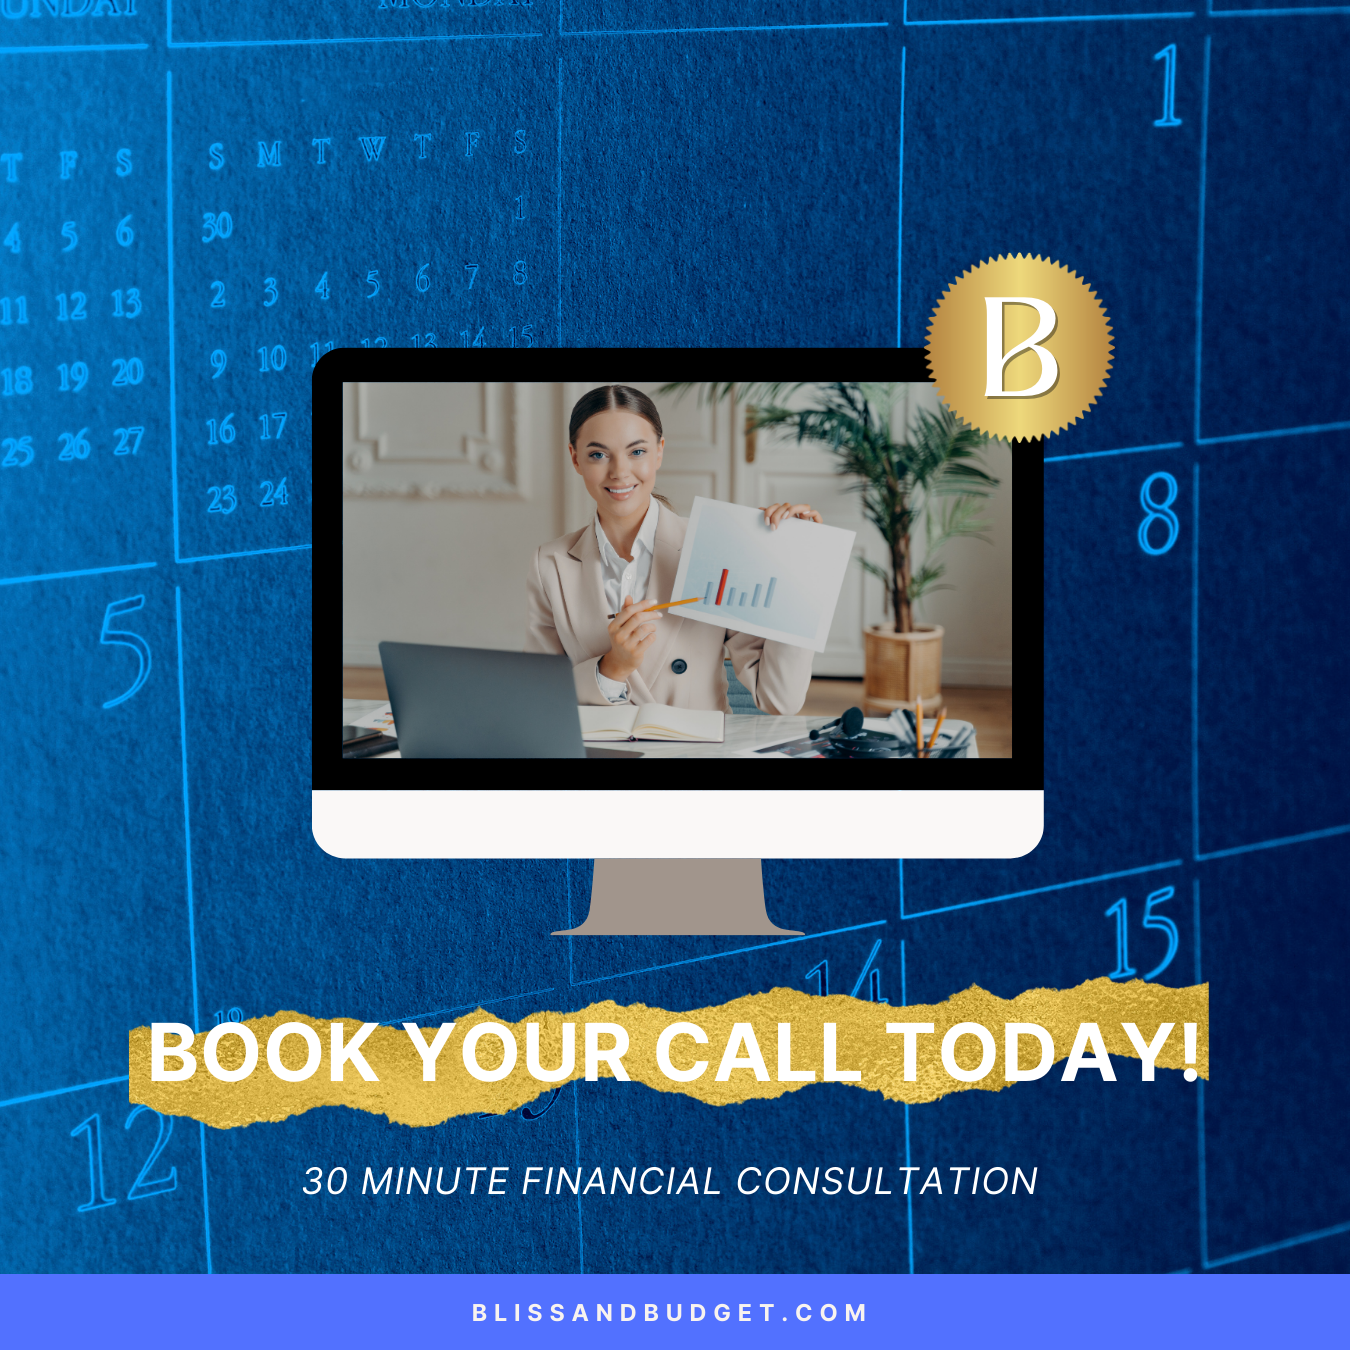 30 Minute Financial Consultation Call